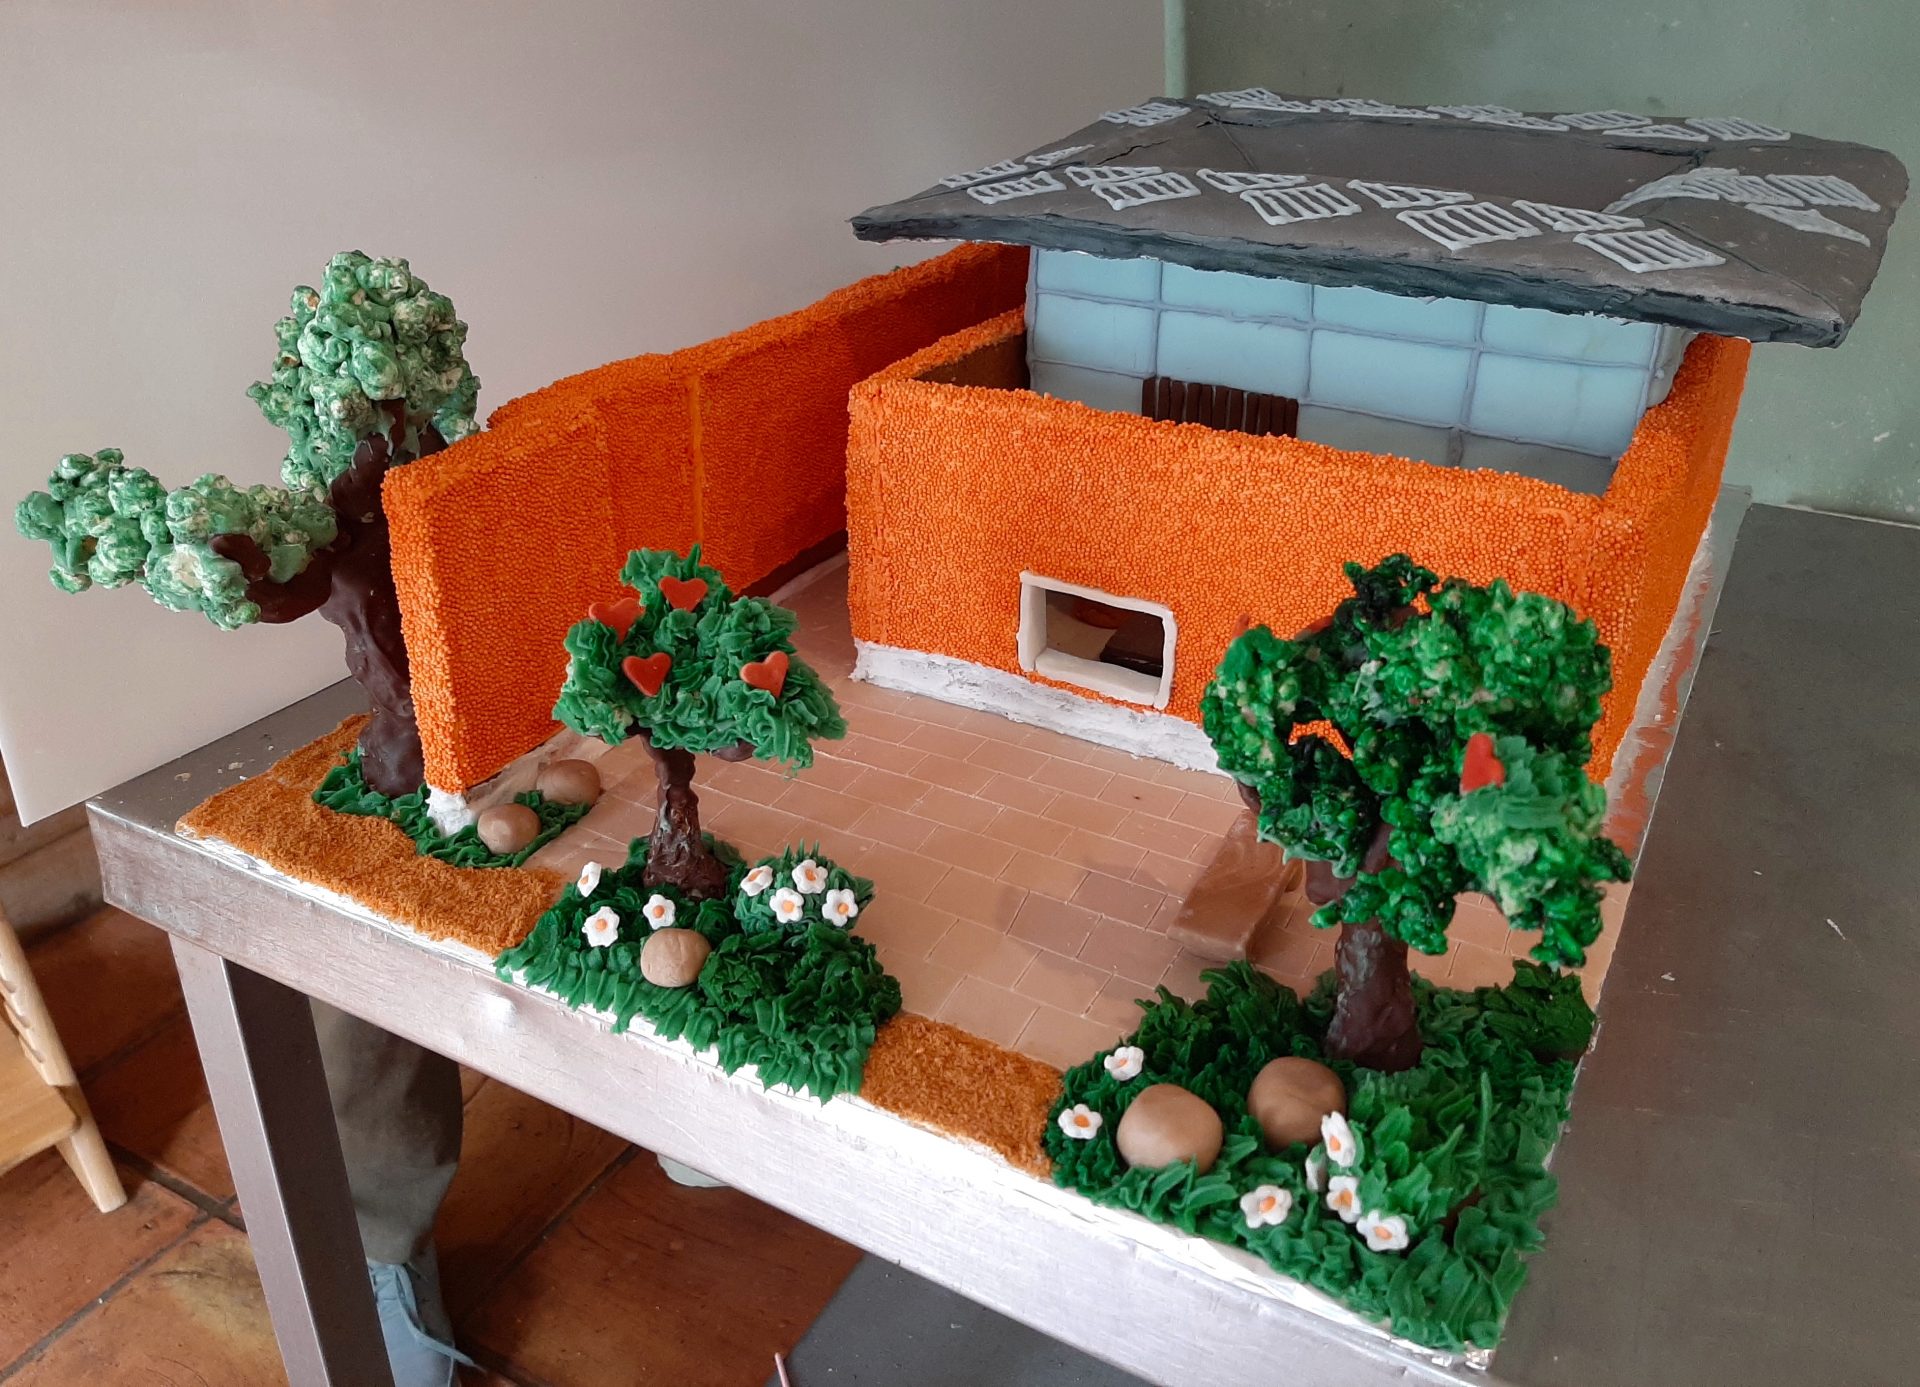 Architecture Bake Off 2021: The Shortlist